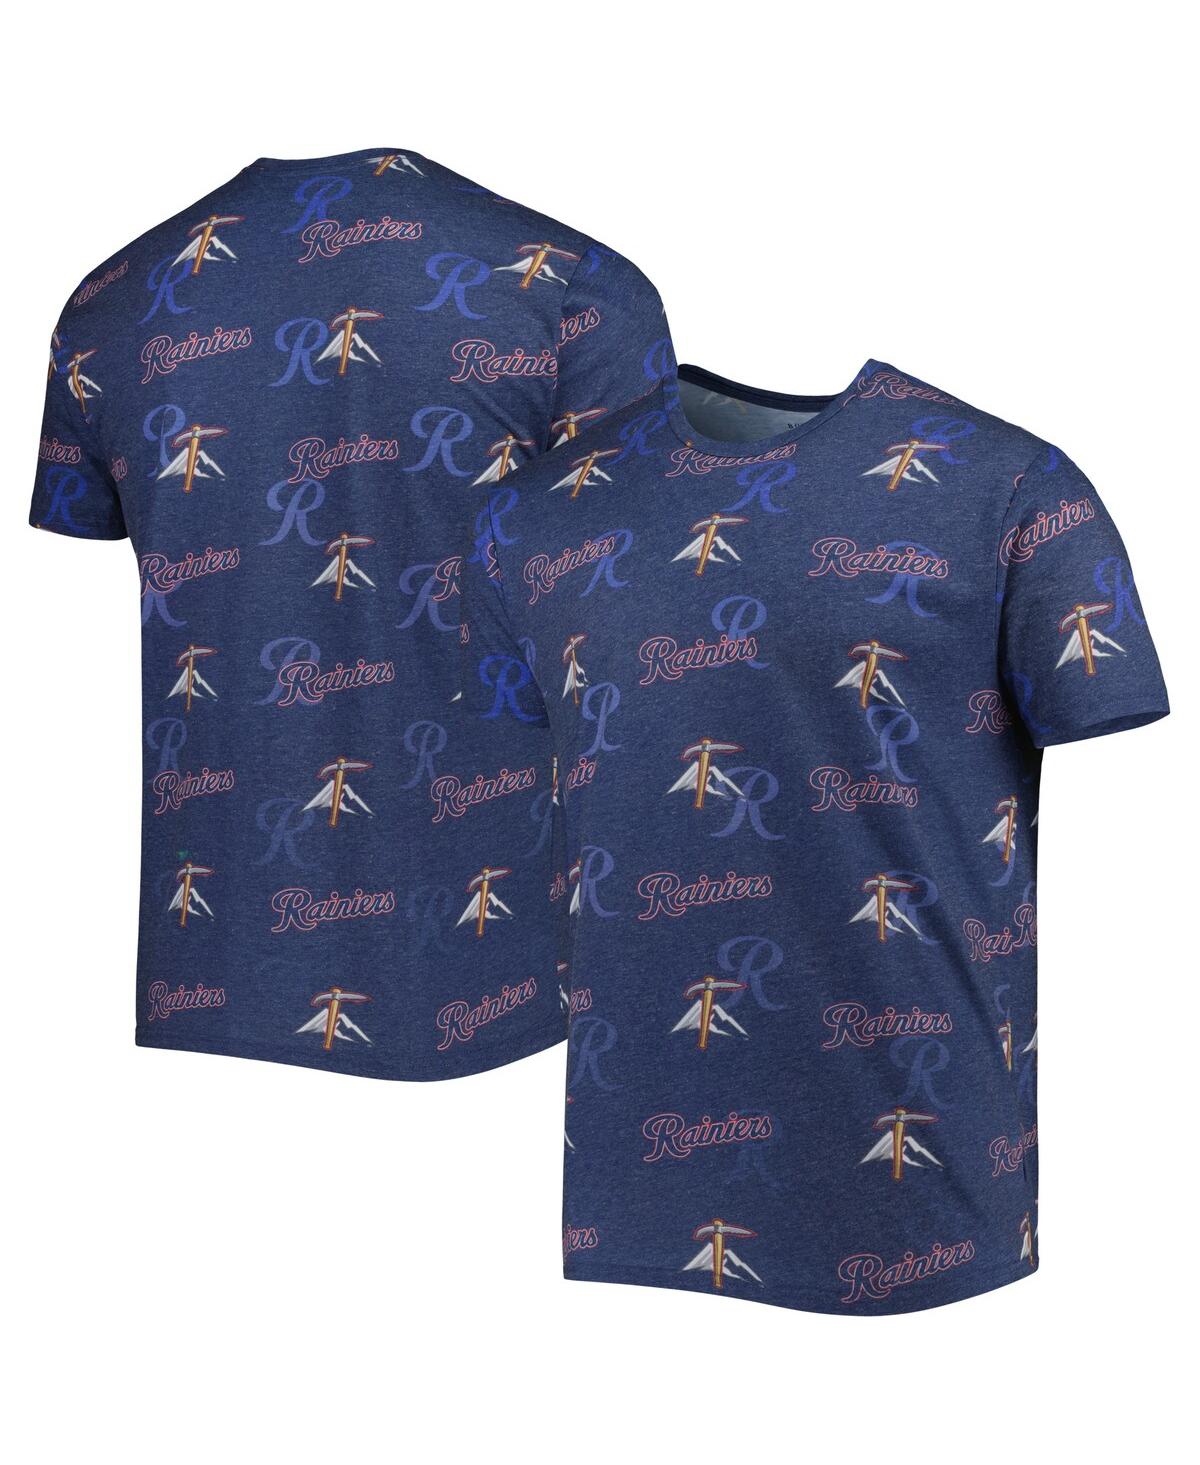 BOXERCRAFT MEN'S NAVY TACOMA RAINIERS ALLOVER PRINT CRAFTED T-SHIRT